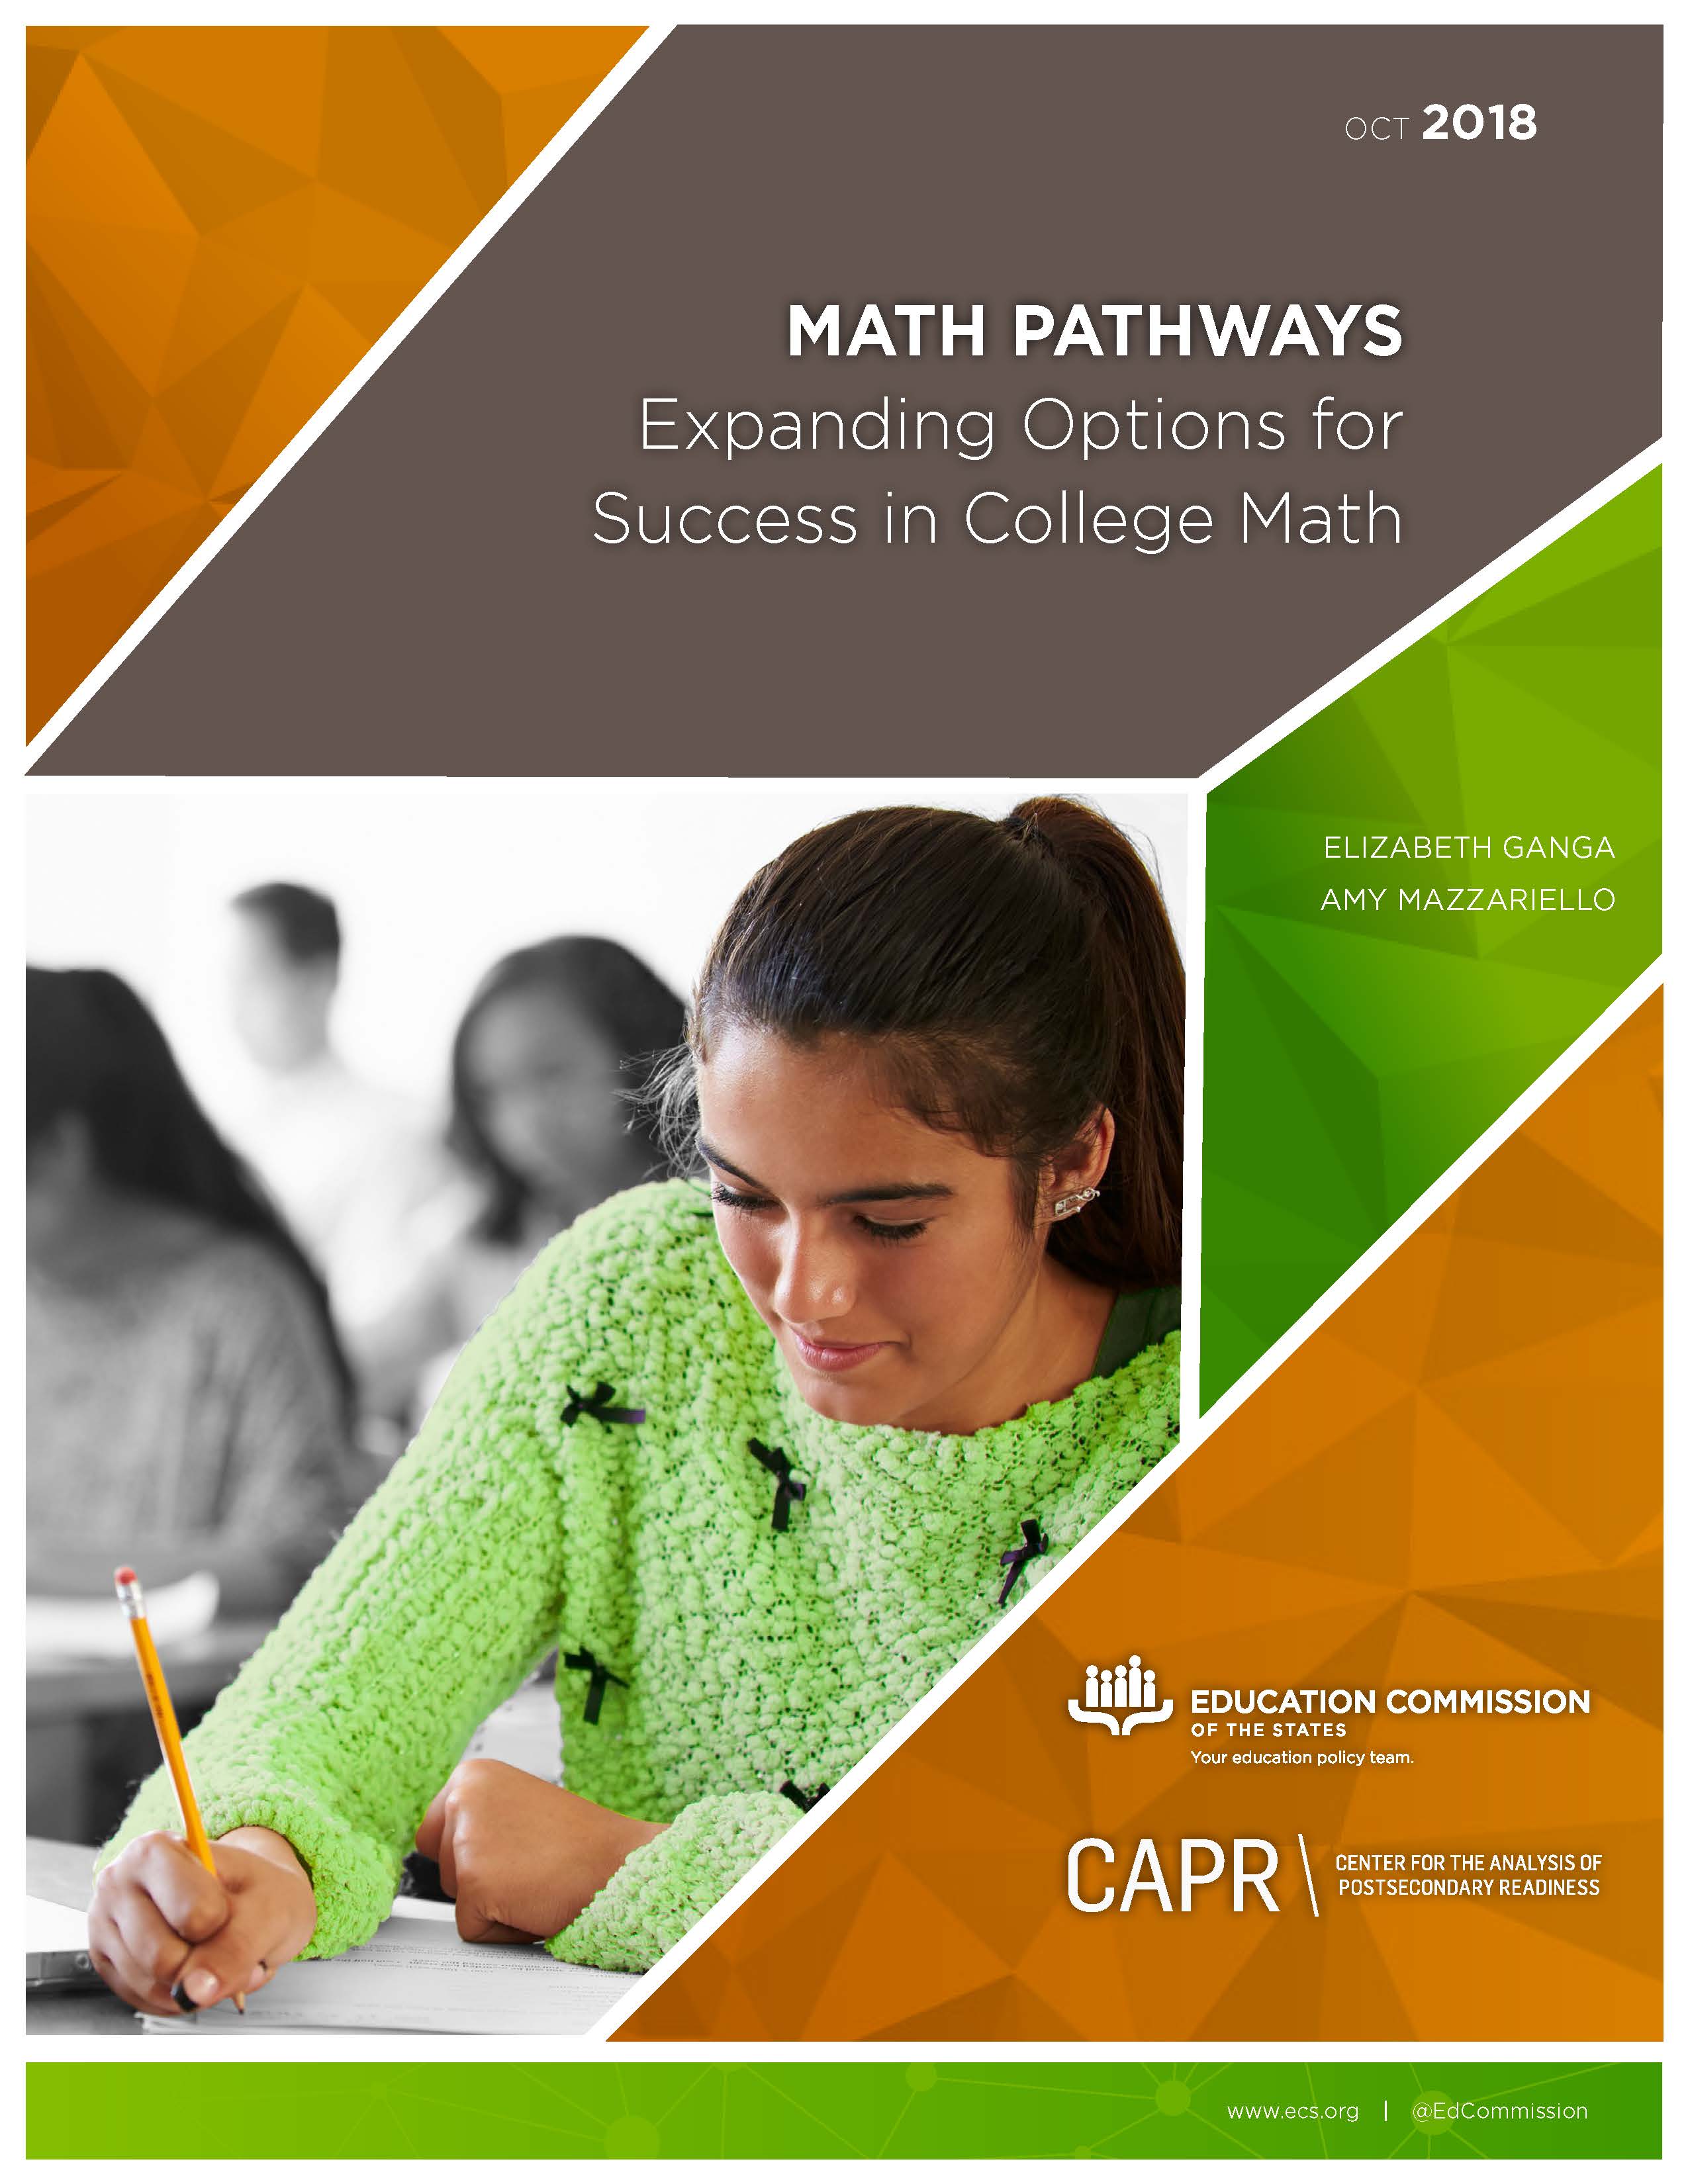  Math Pathways: Expanding Options for Success in College Math